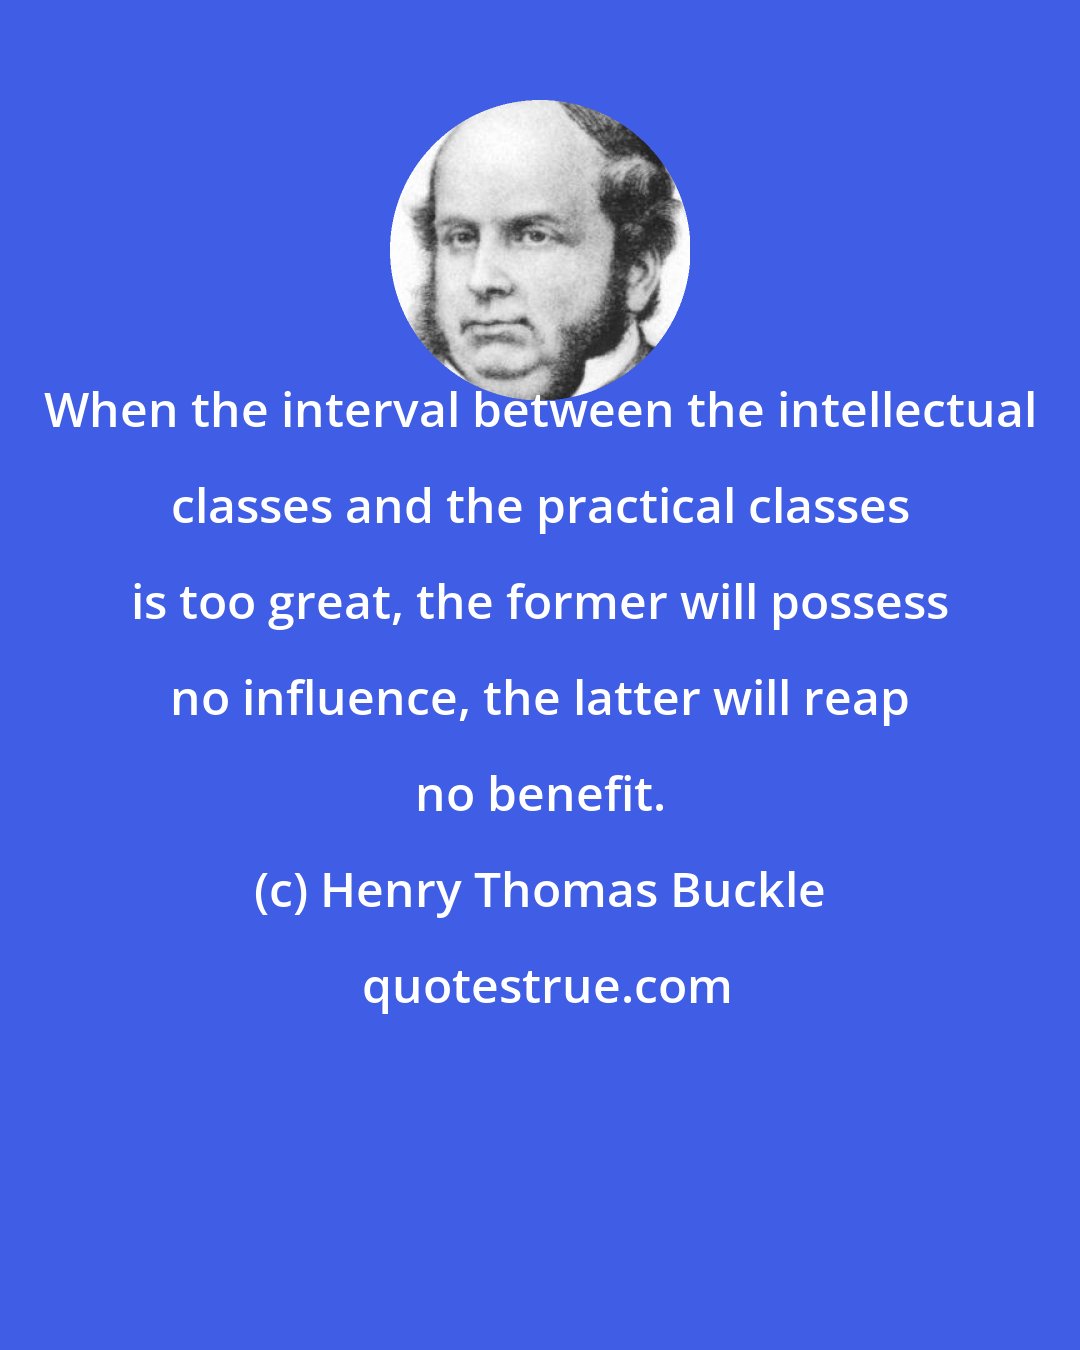 Henry Thomas Buckle: When the interval between the intellectual classes and the practical classes is too great, the former will possess no influence, the latter will reap no benefit.